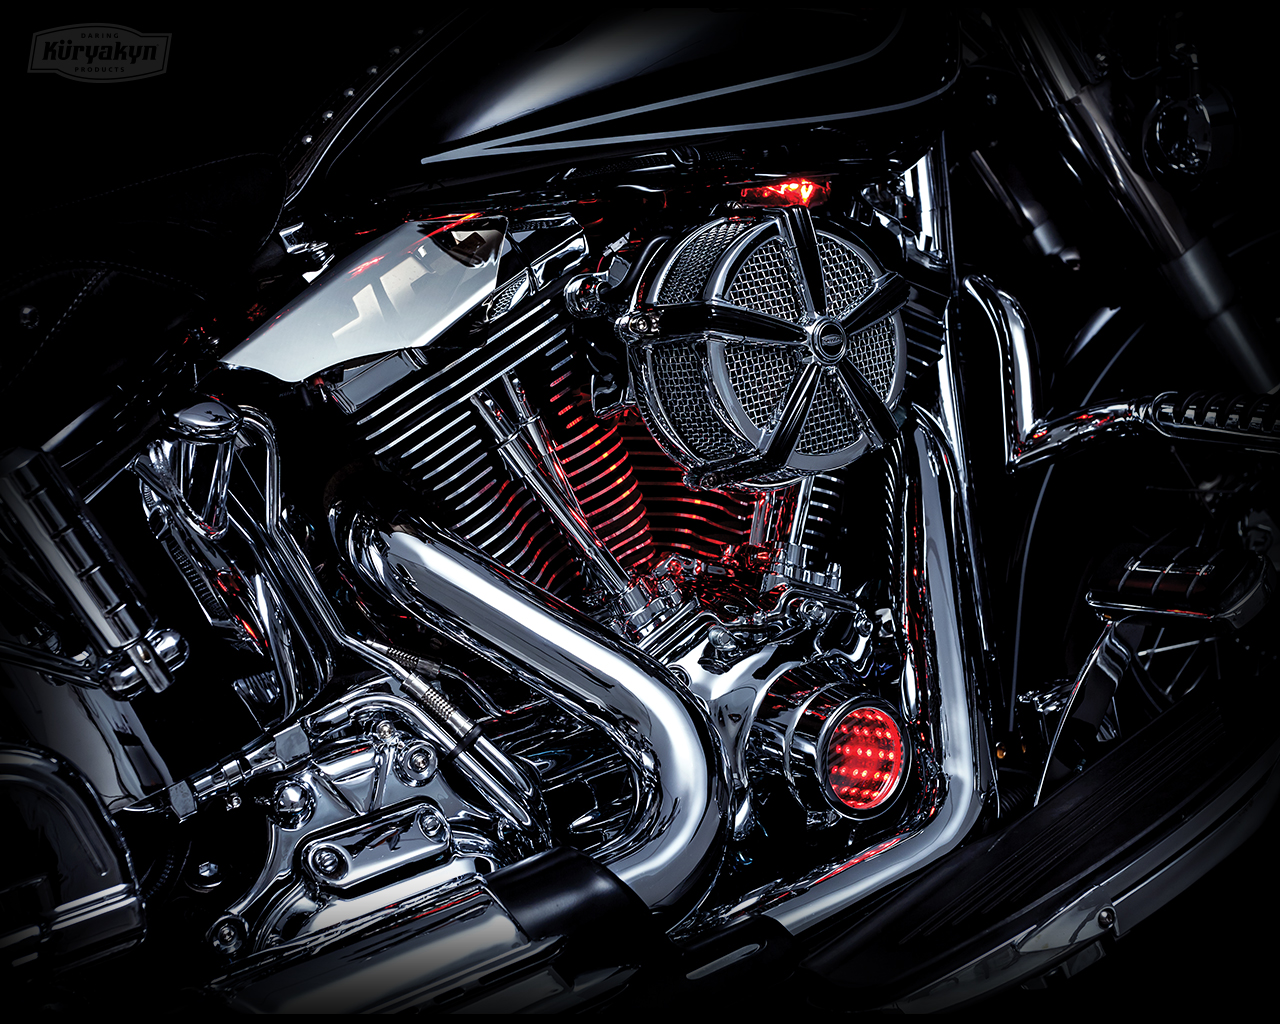 Wallpapers | Motorcycle Parts and Accessories for Harley